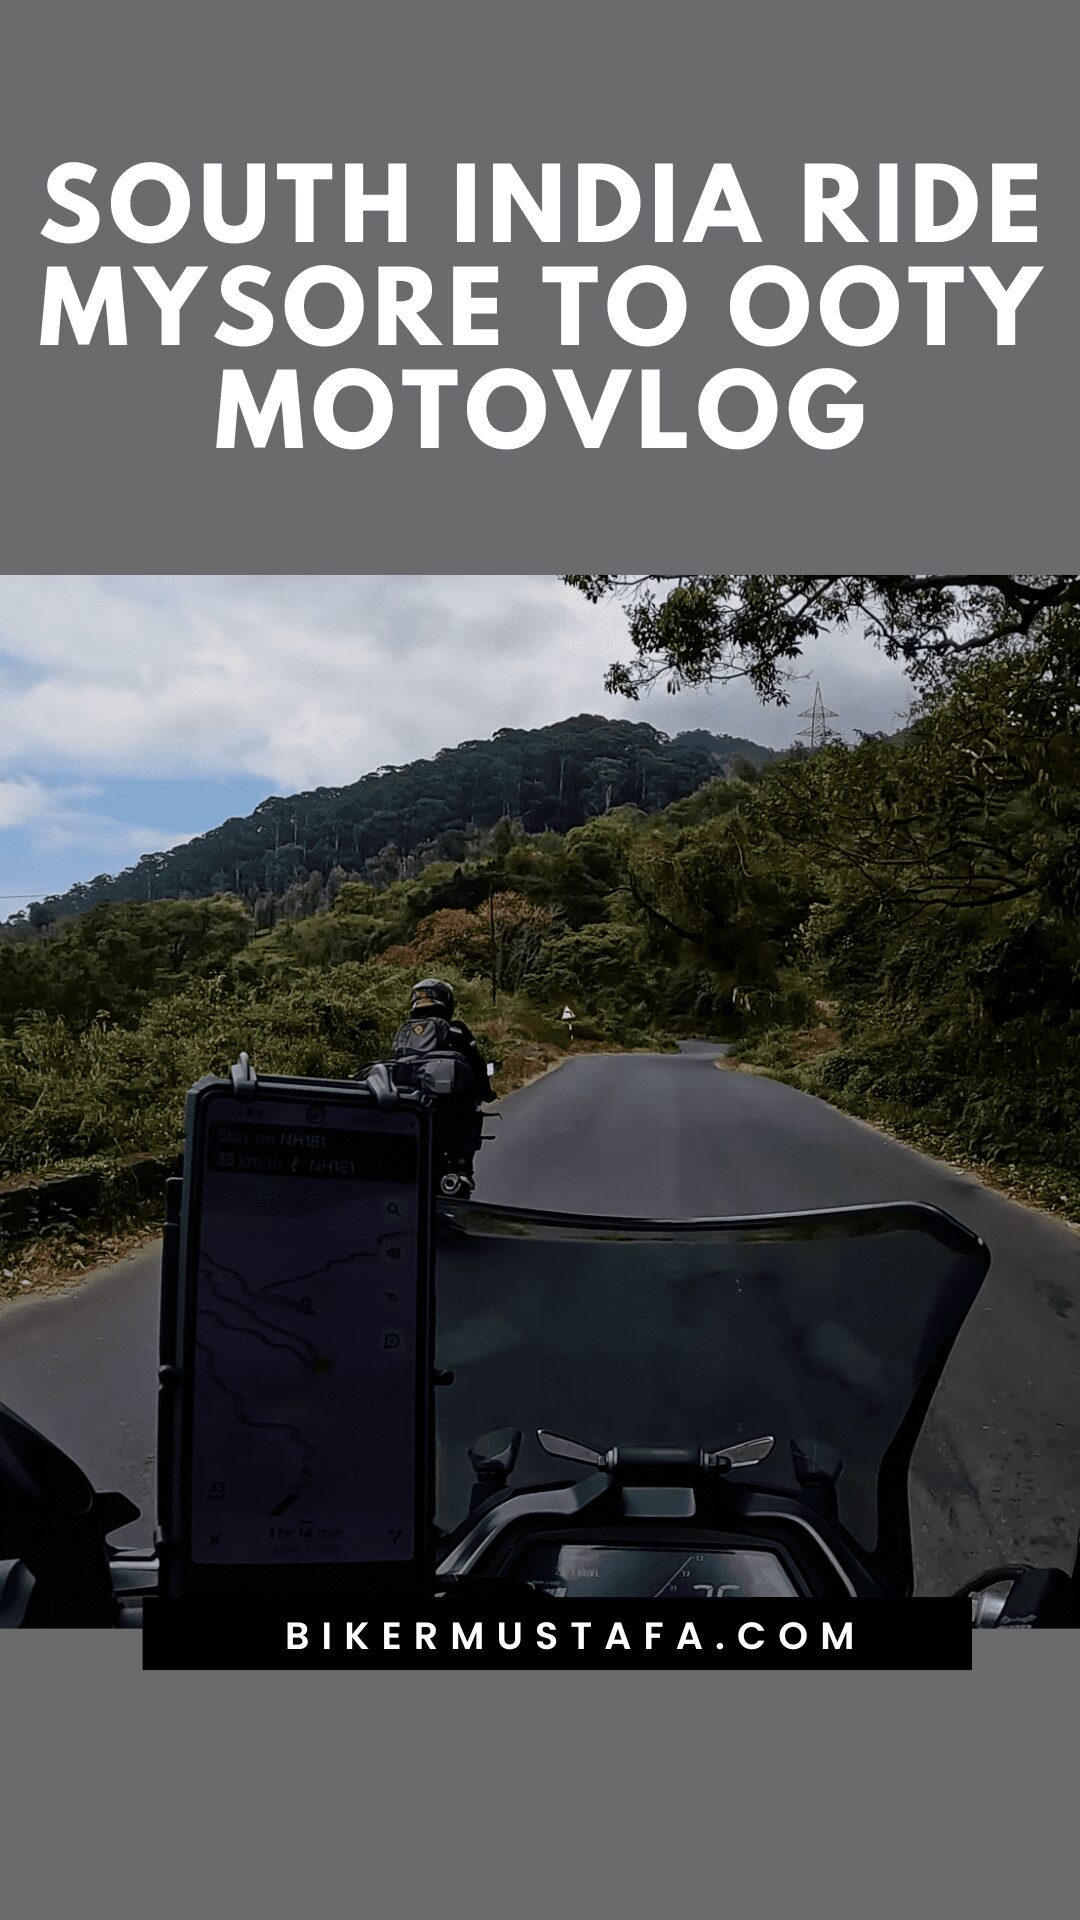 South India Ride Mysore to Ooty Motovlog